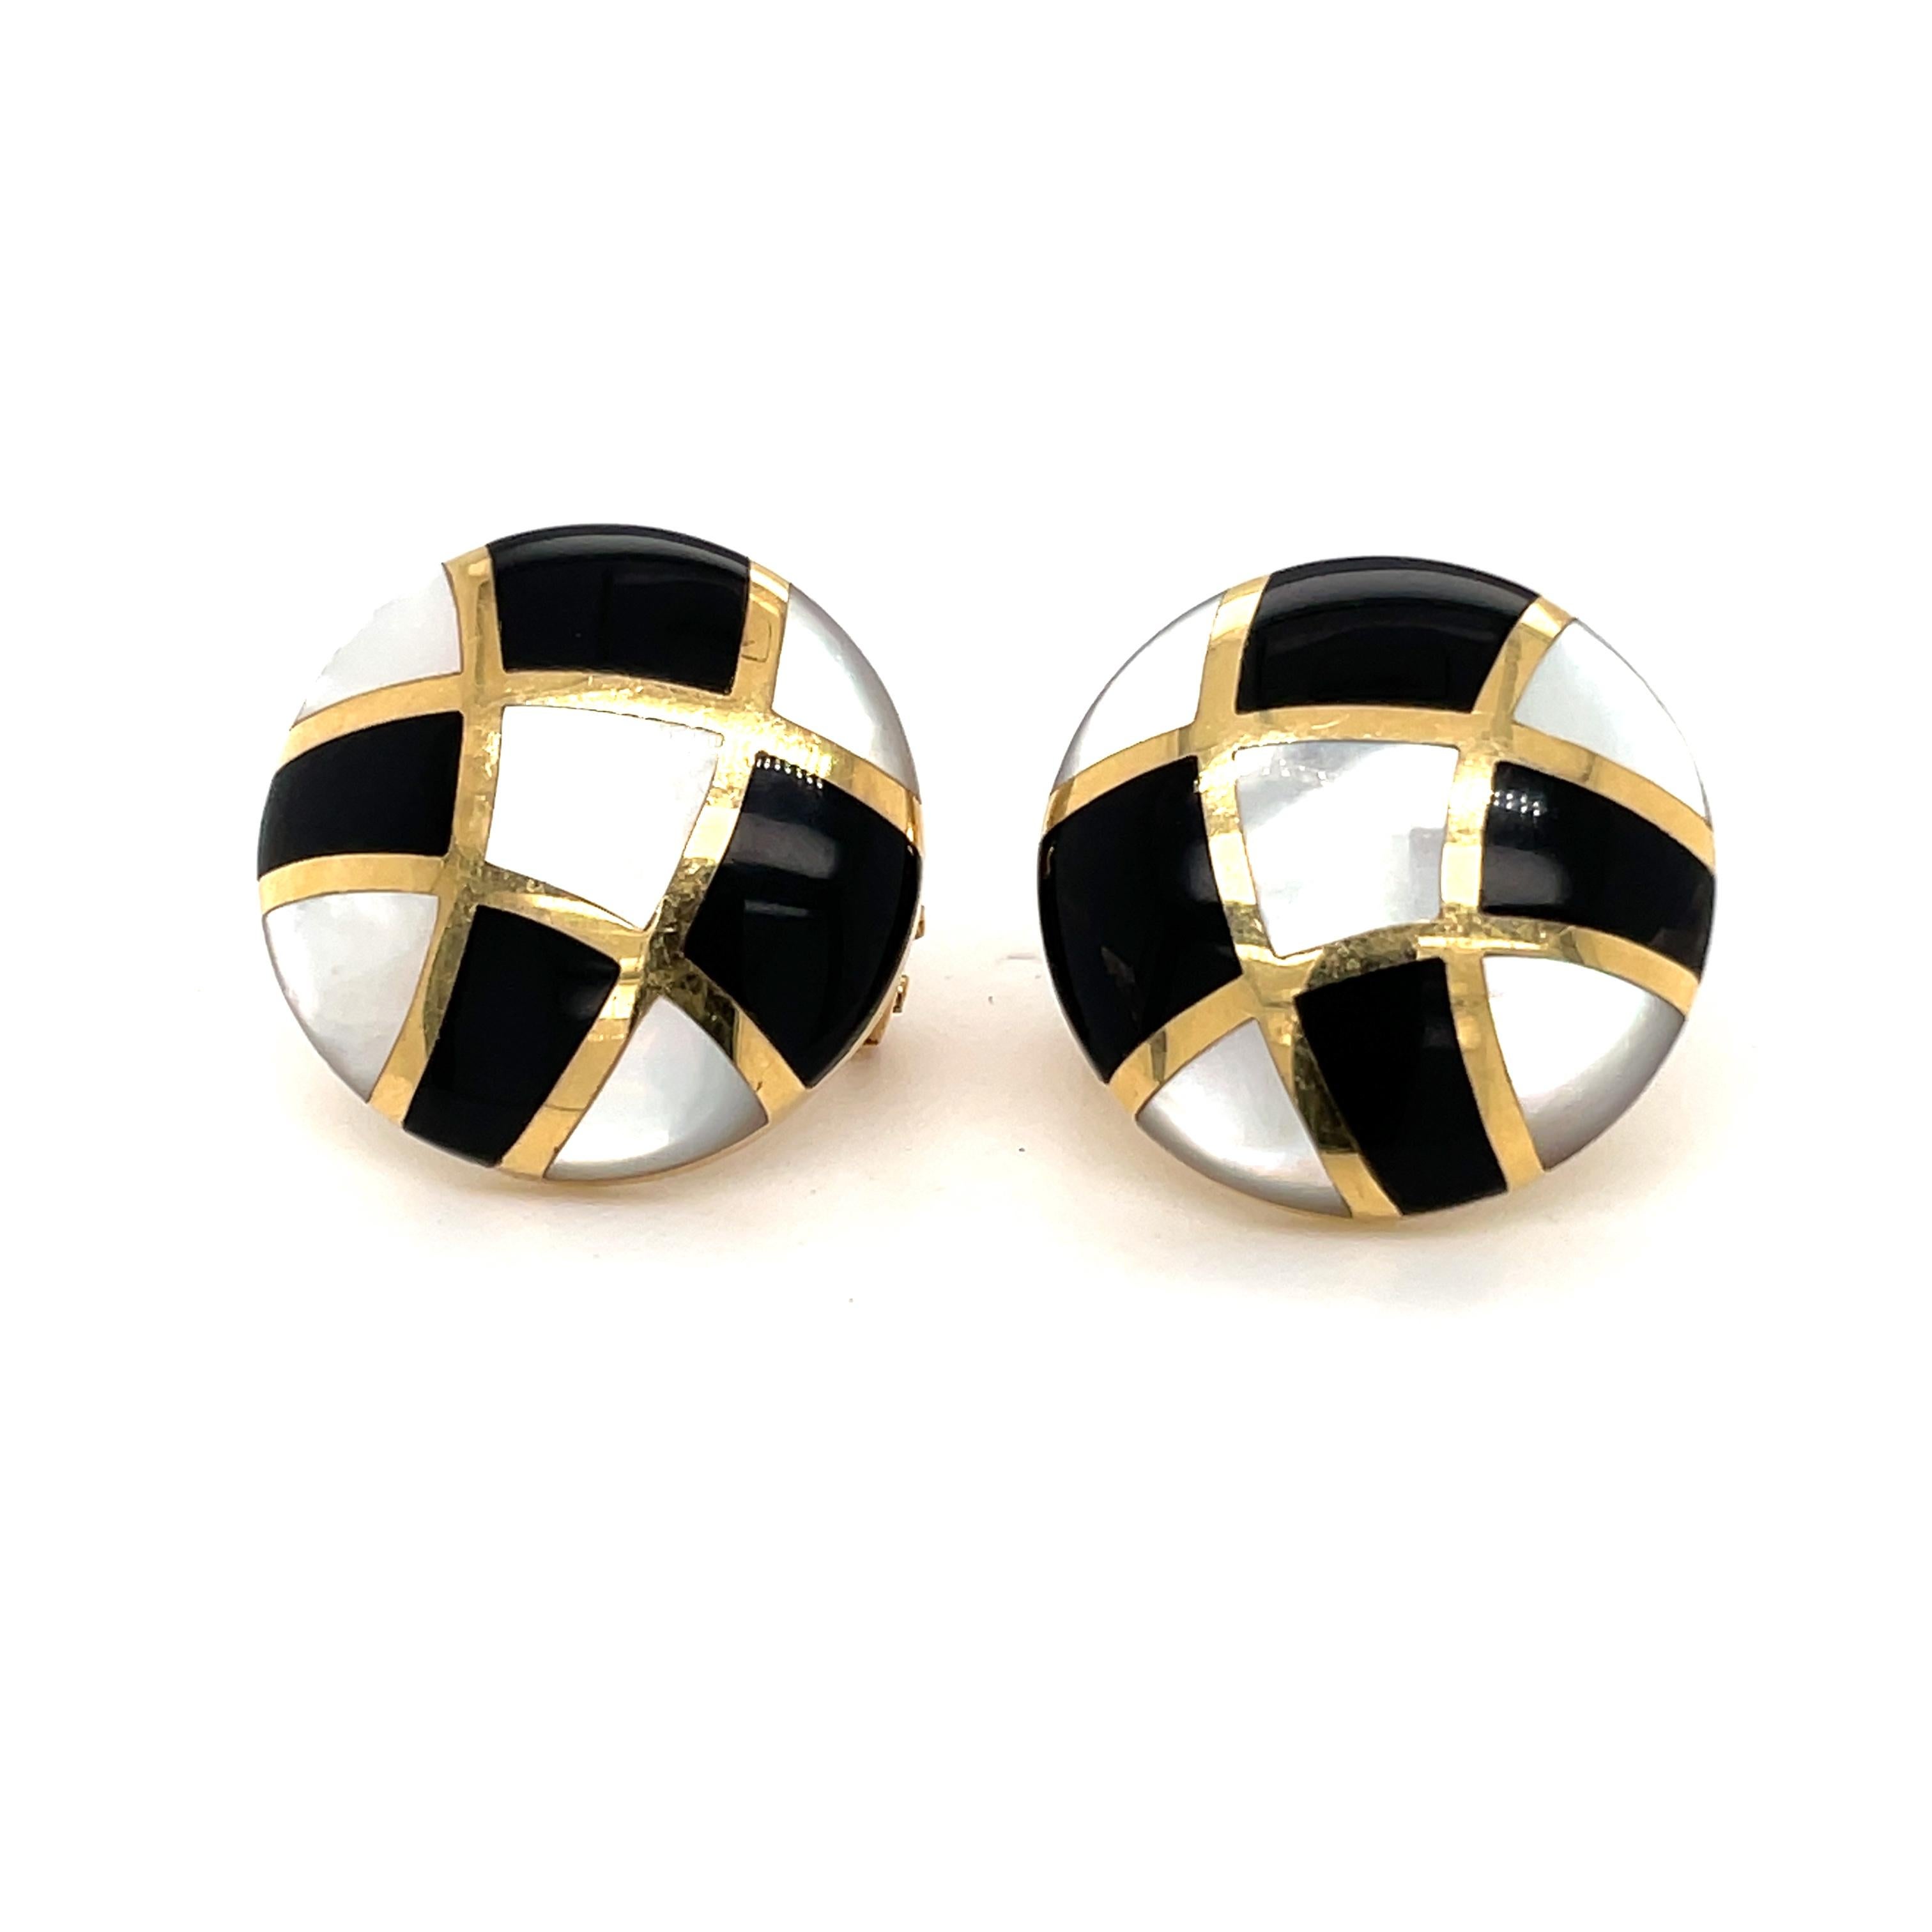 Asch Grossbardt 14K Yellow Gold Mother of Pearl and Onyx Clip Post Earrings.  